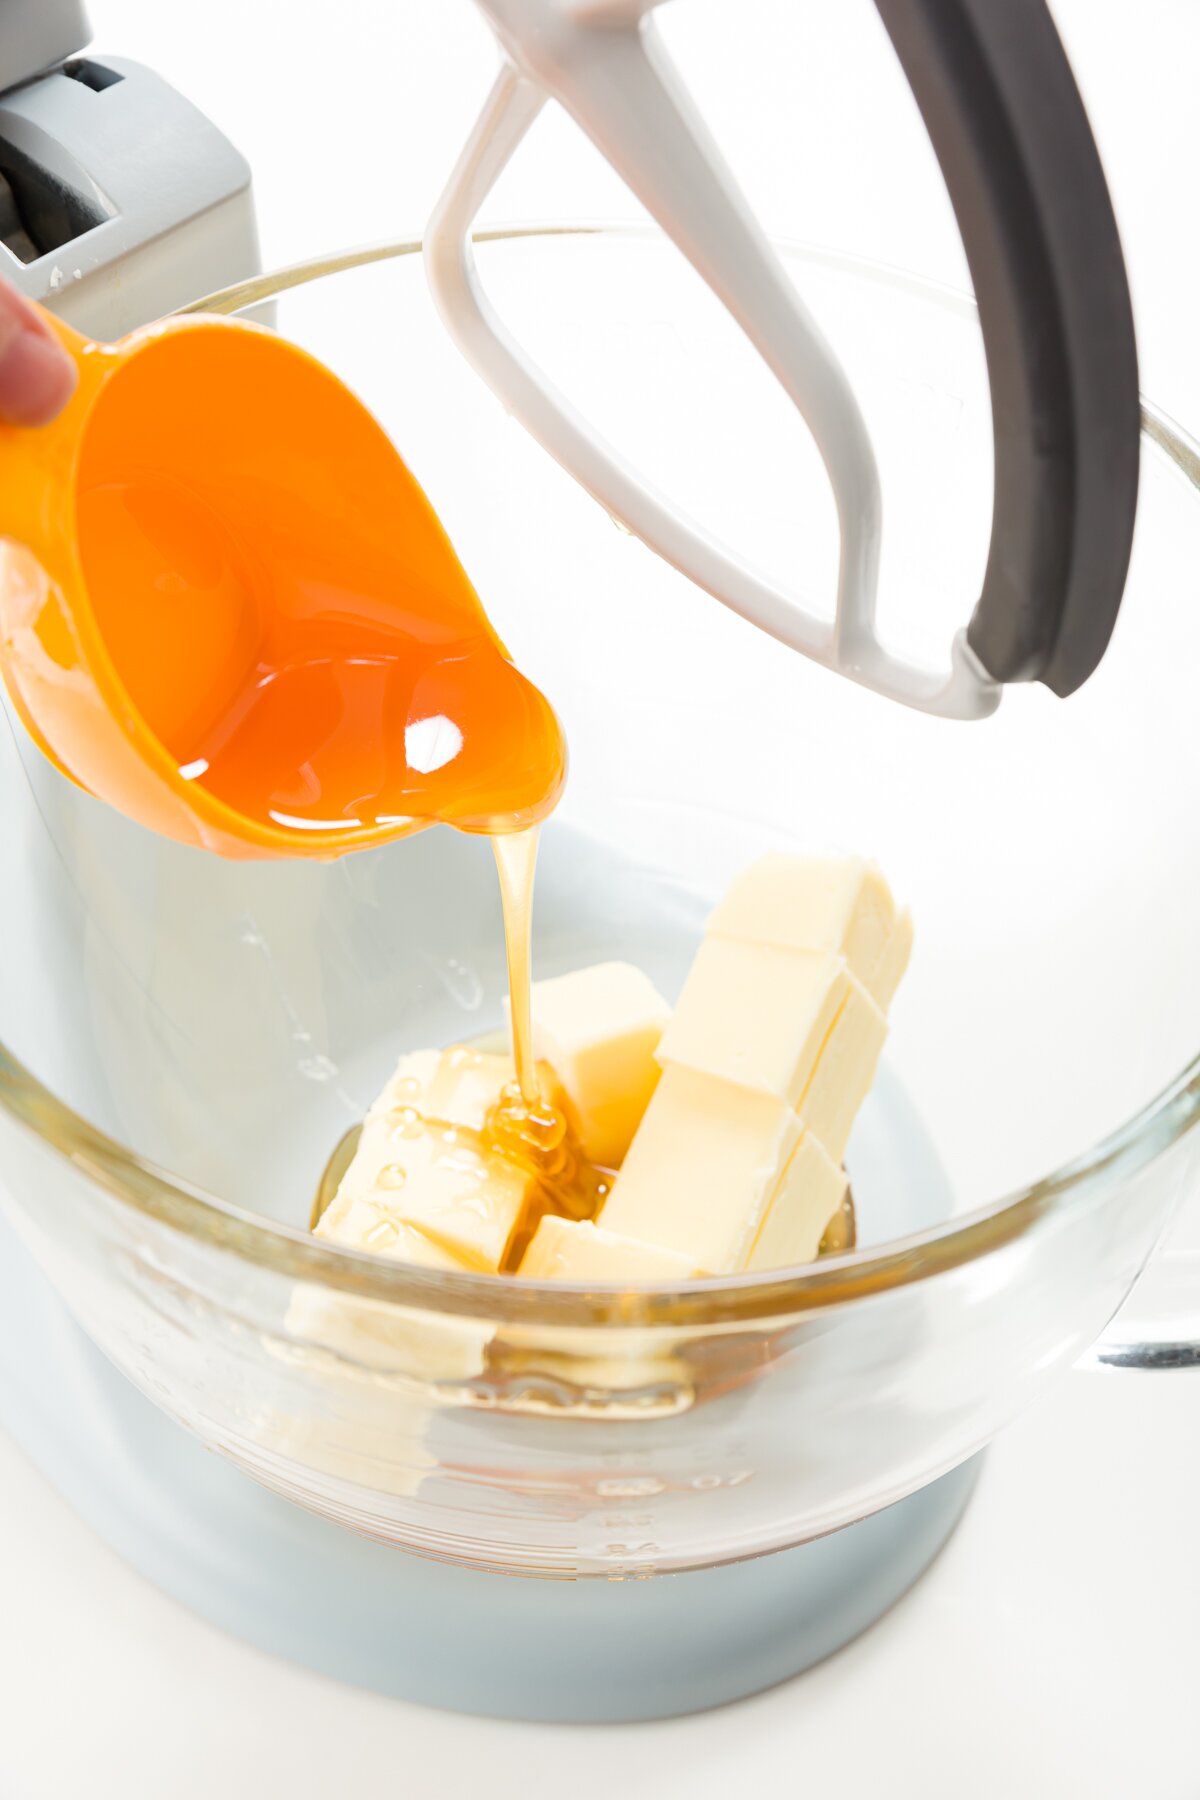 Pour honey onto butter in the glass bowl of a stand mixer.